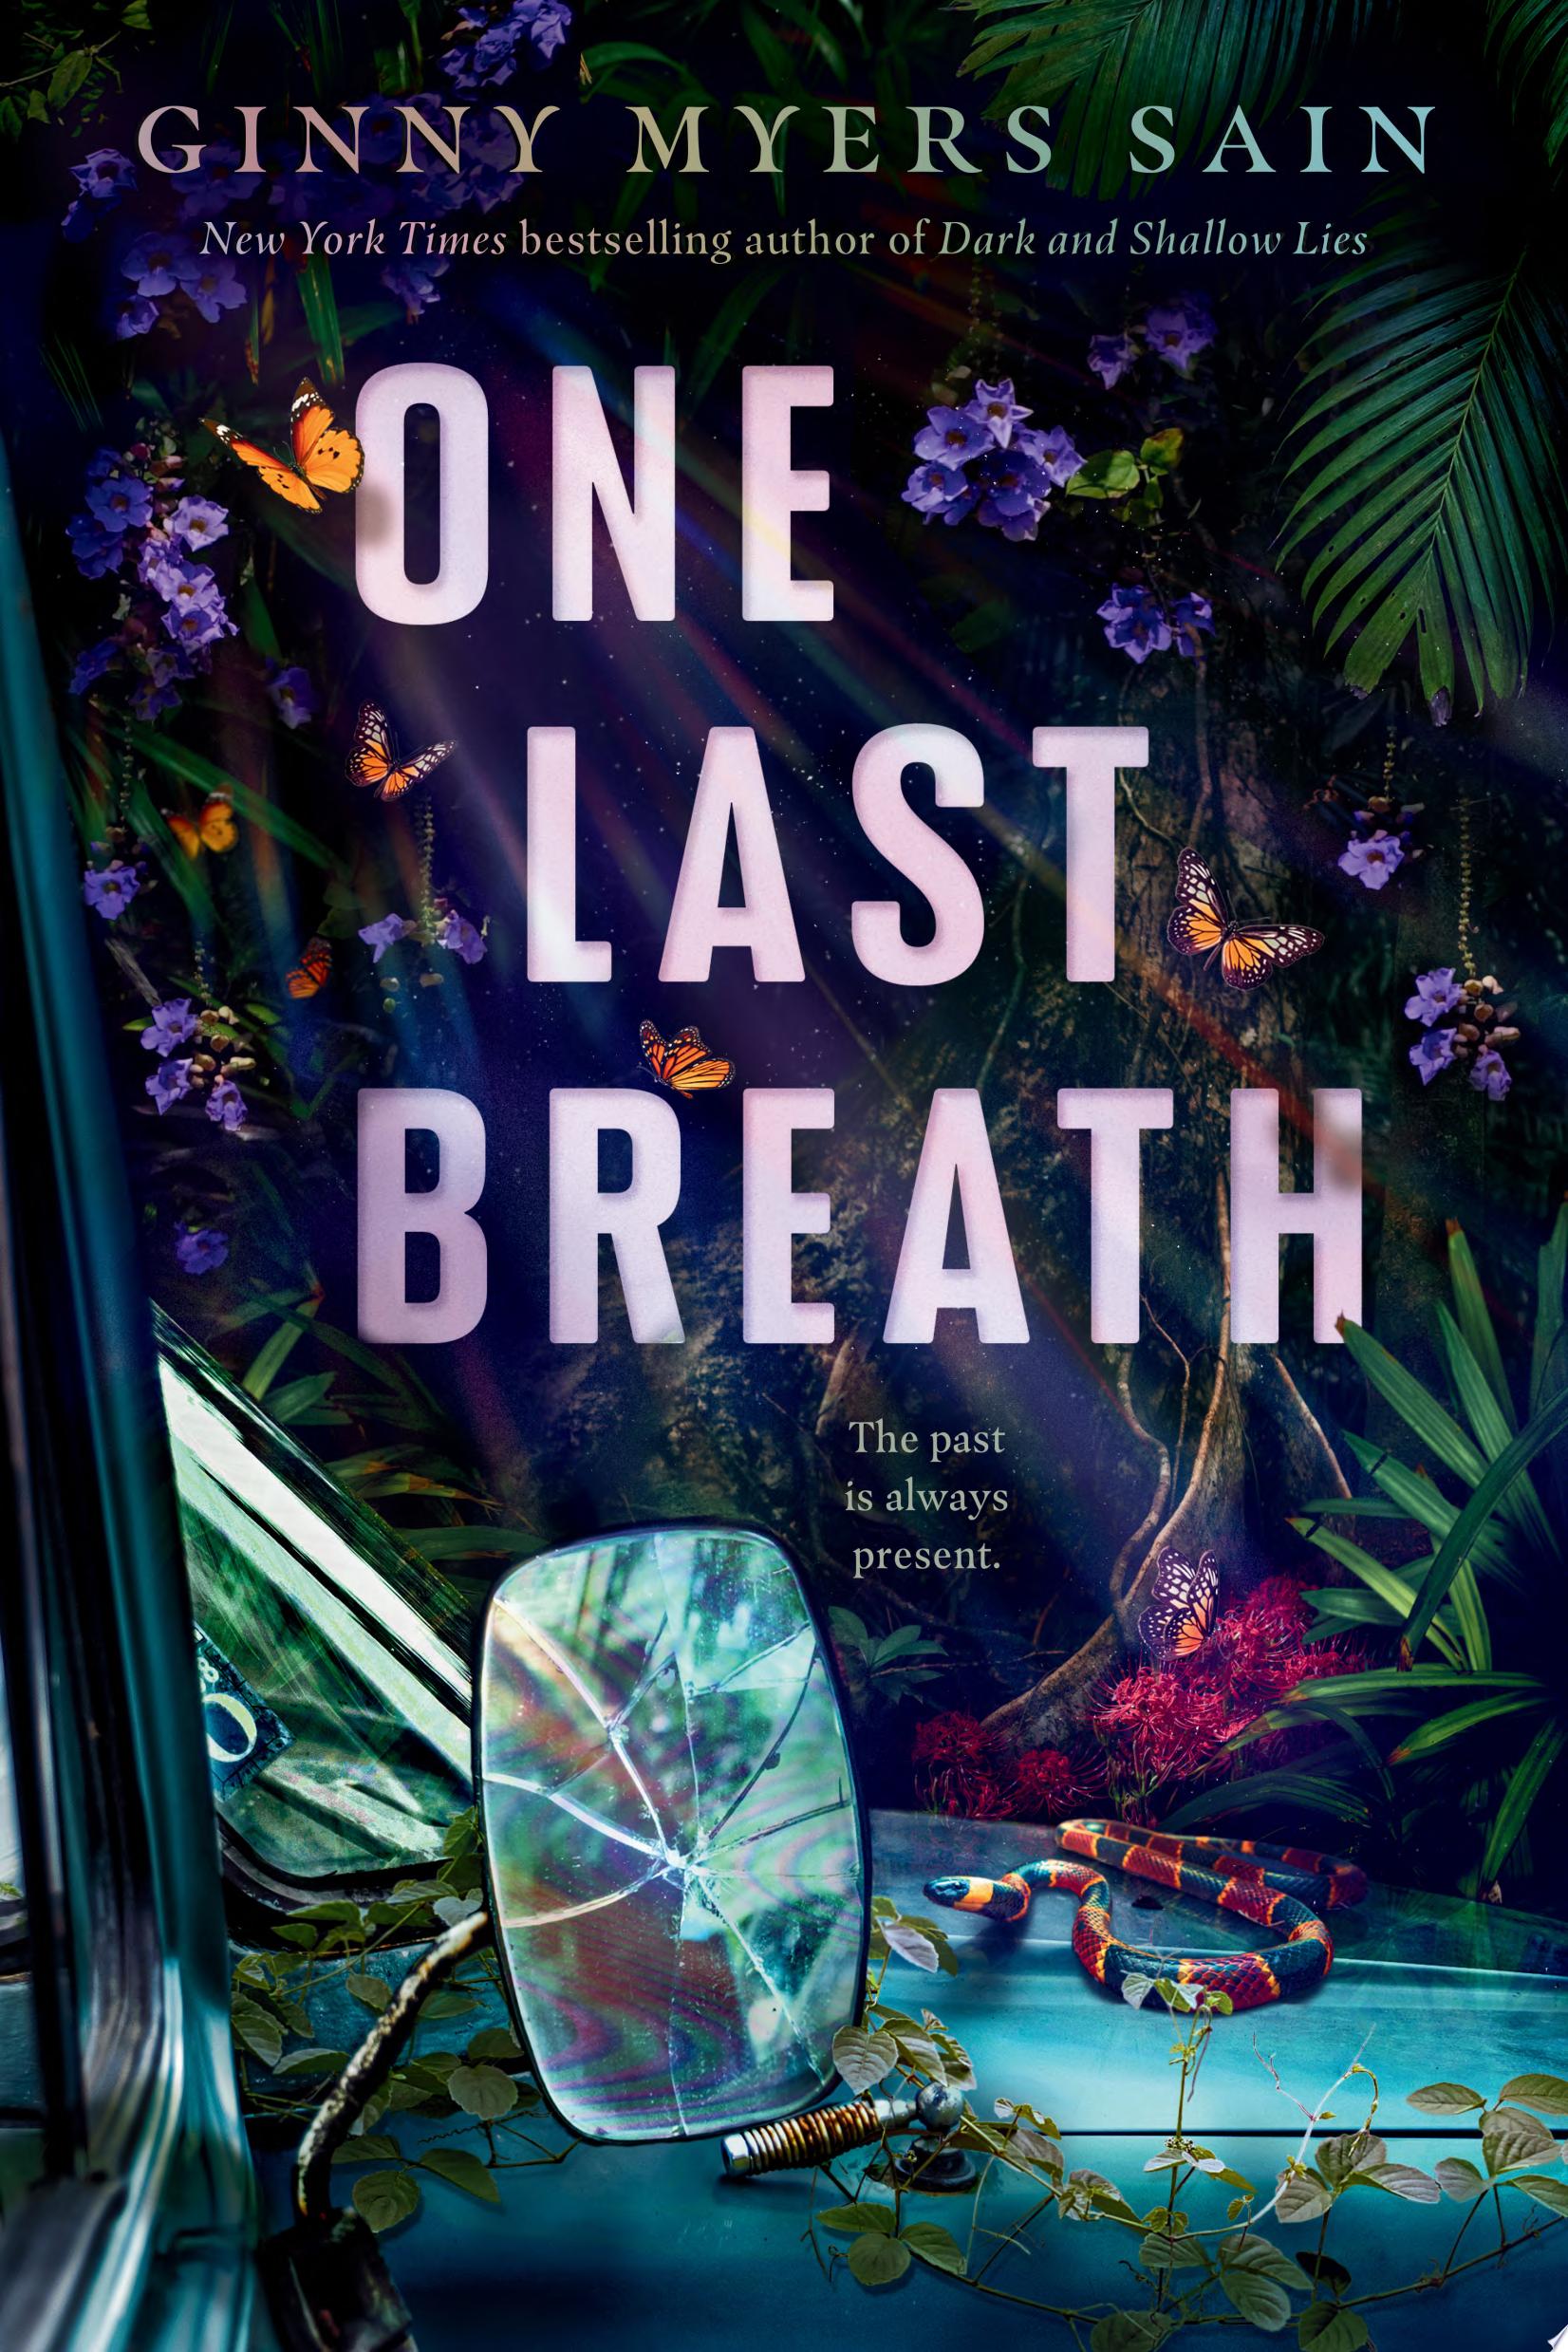 Image for "One Last Breath"